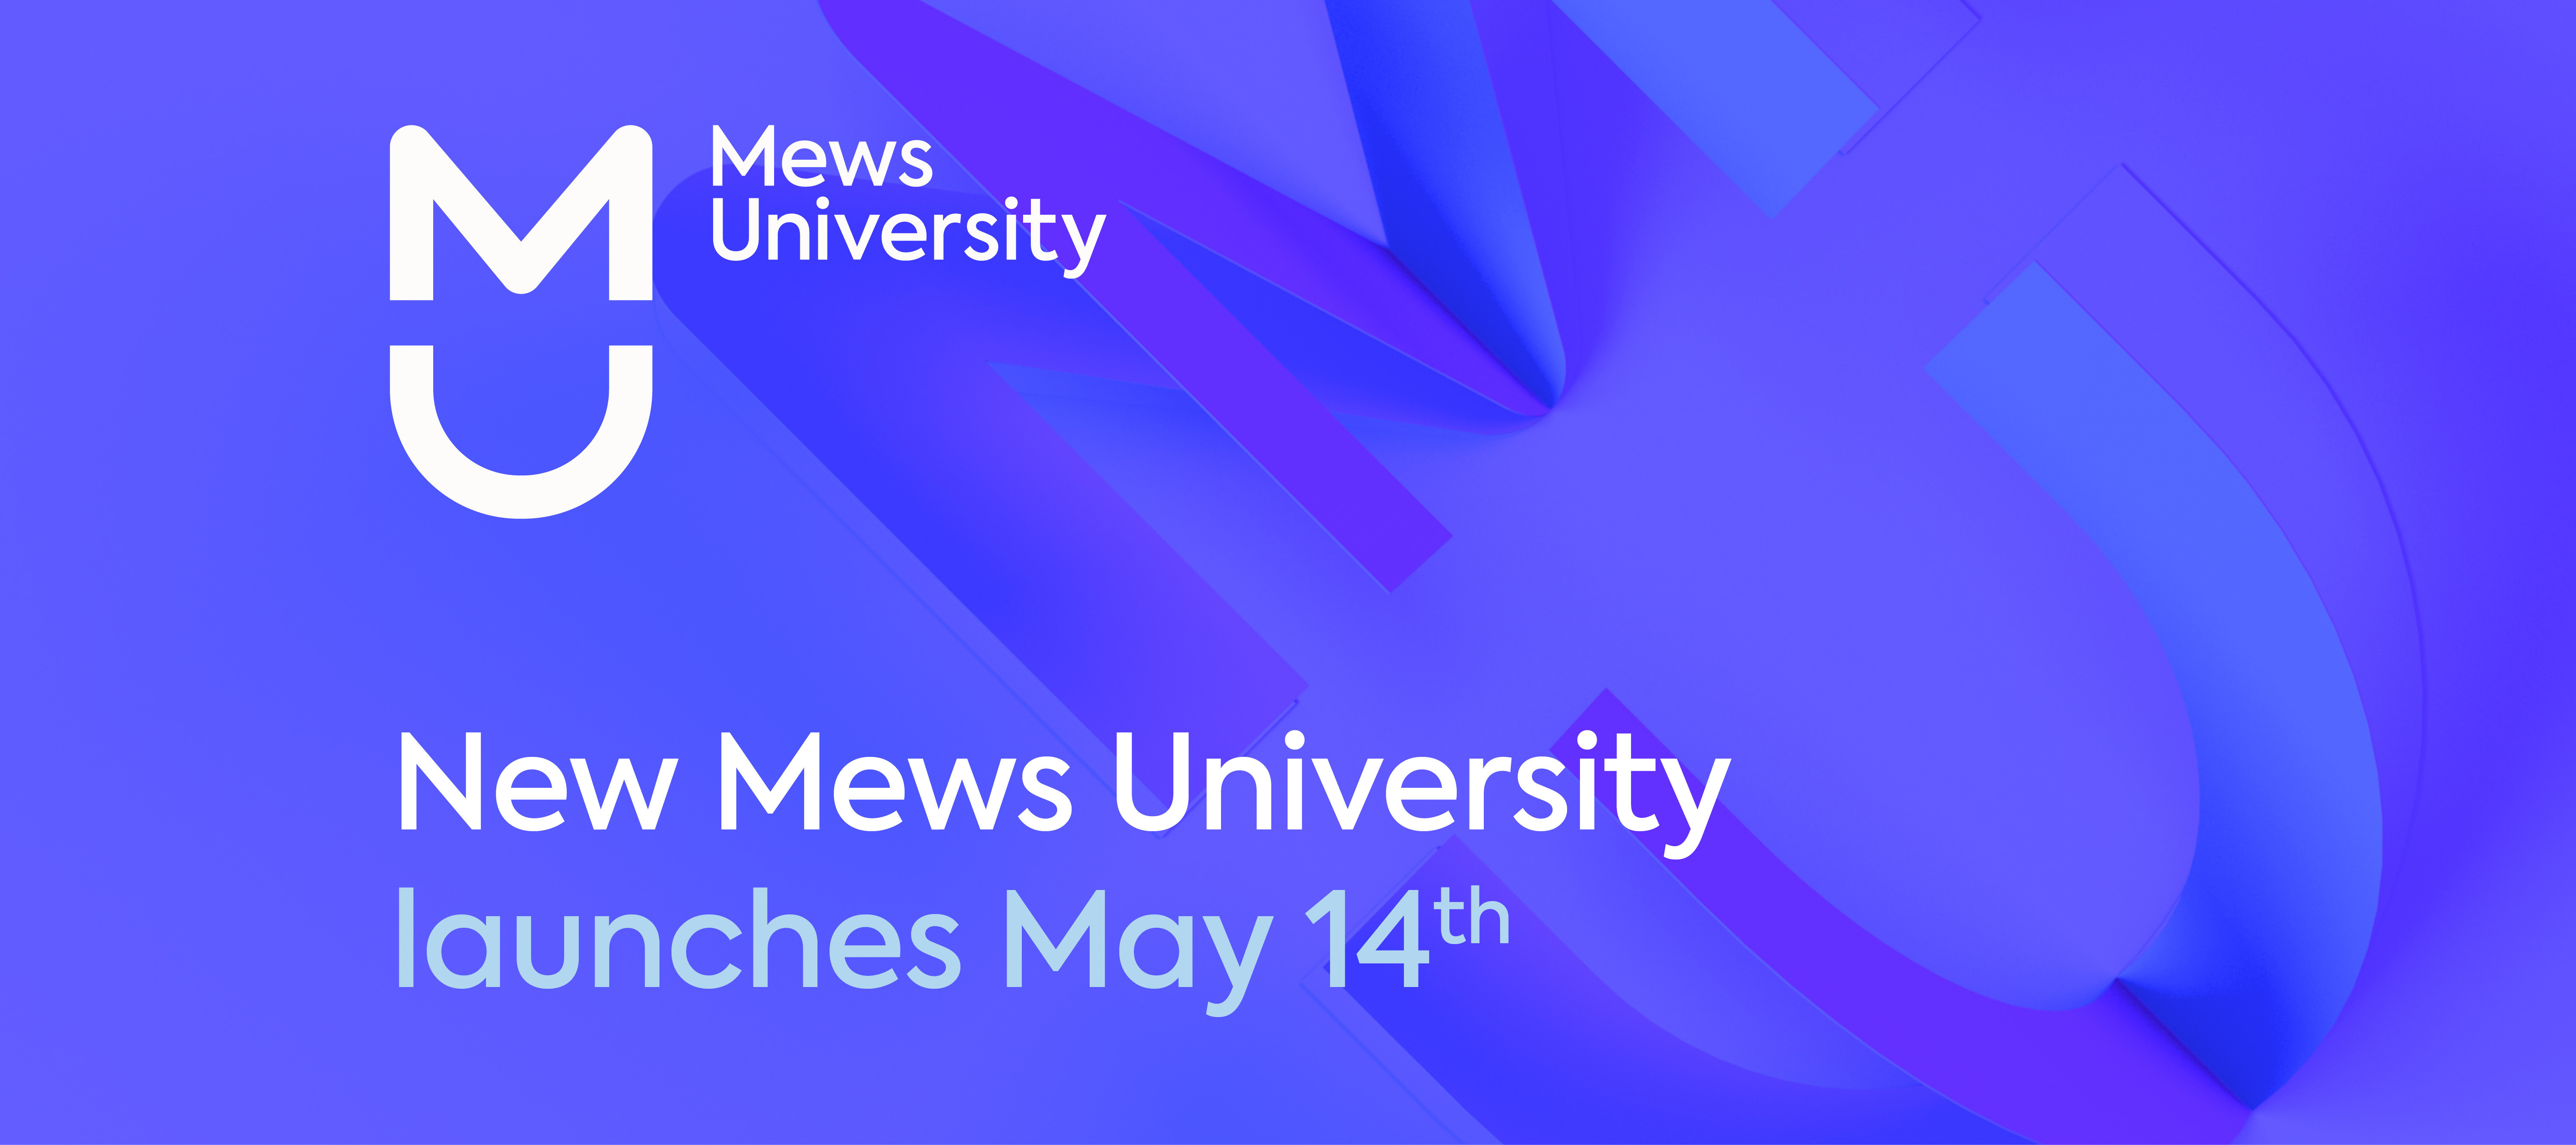 Mews University upgrade coming May 14! Get the details